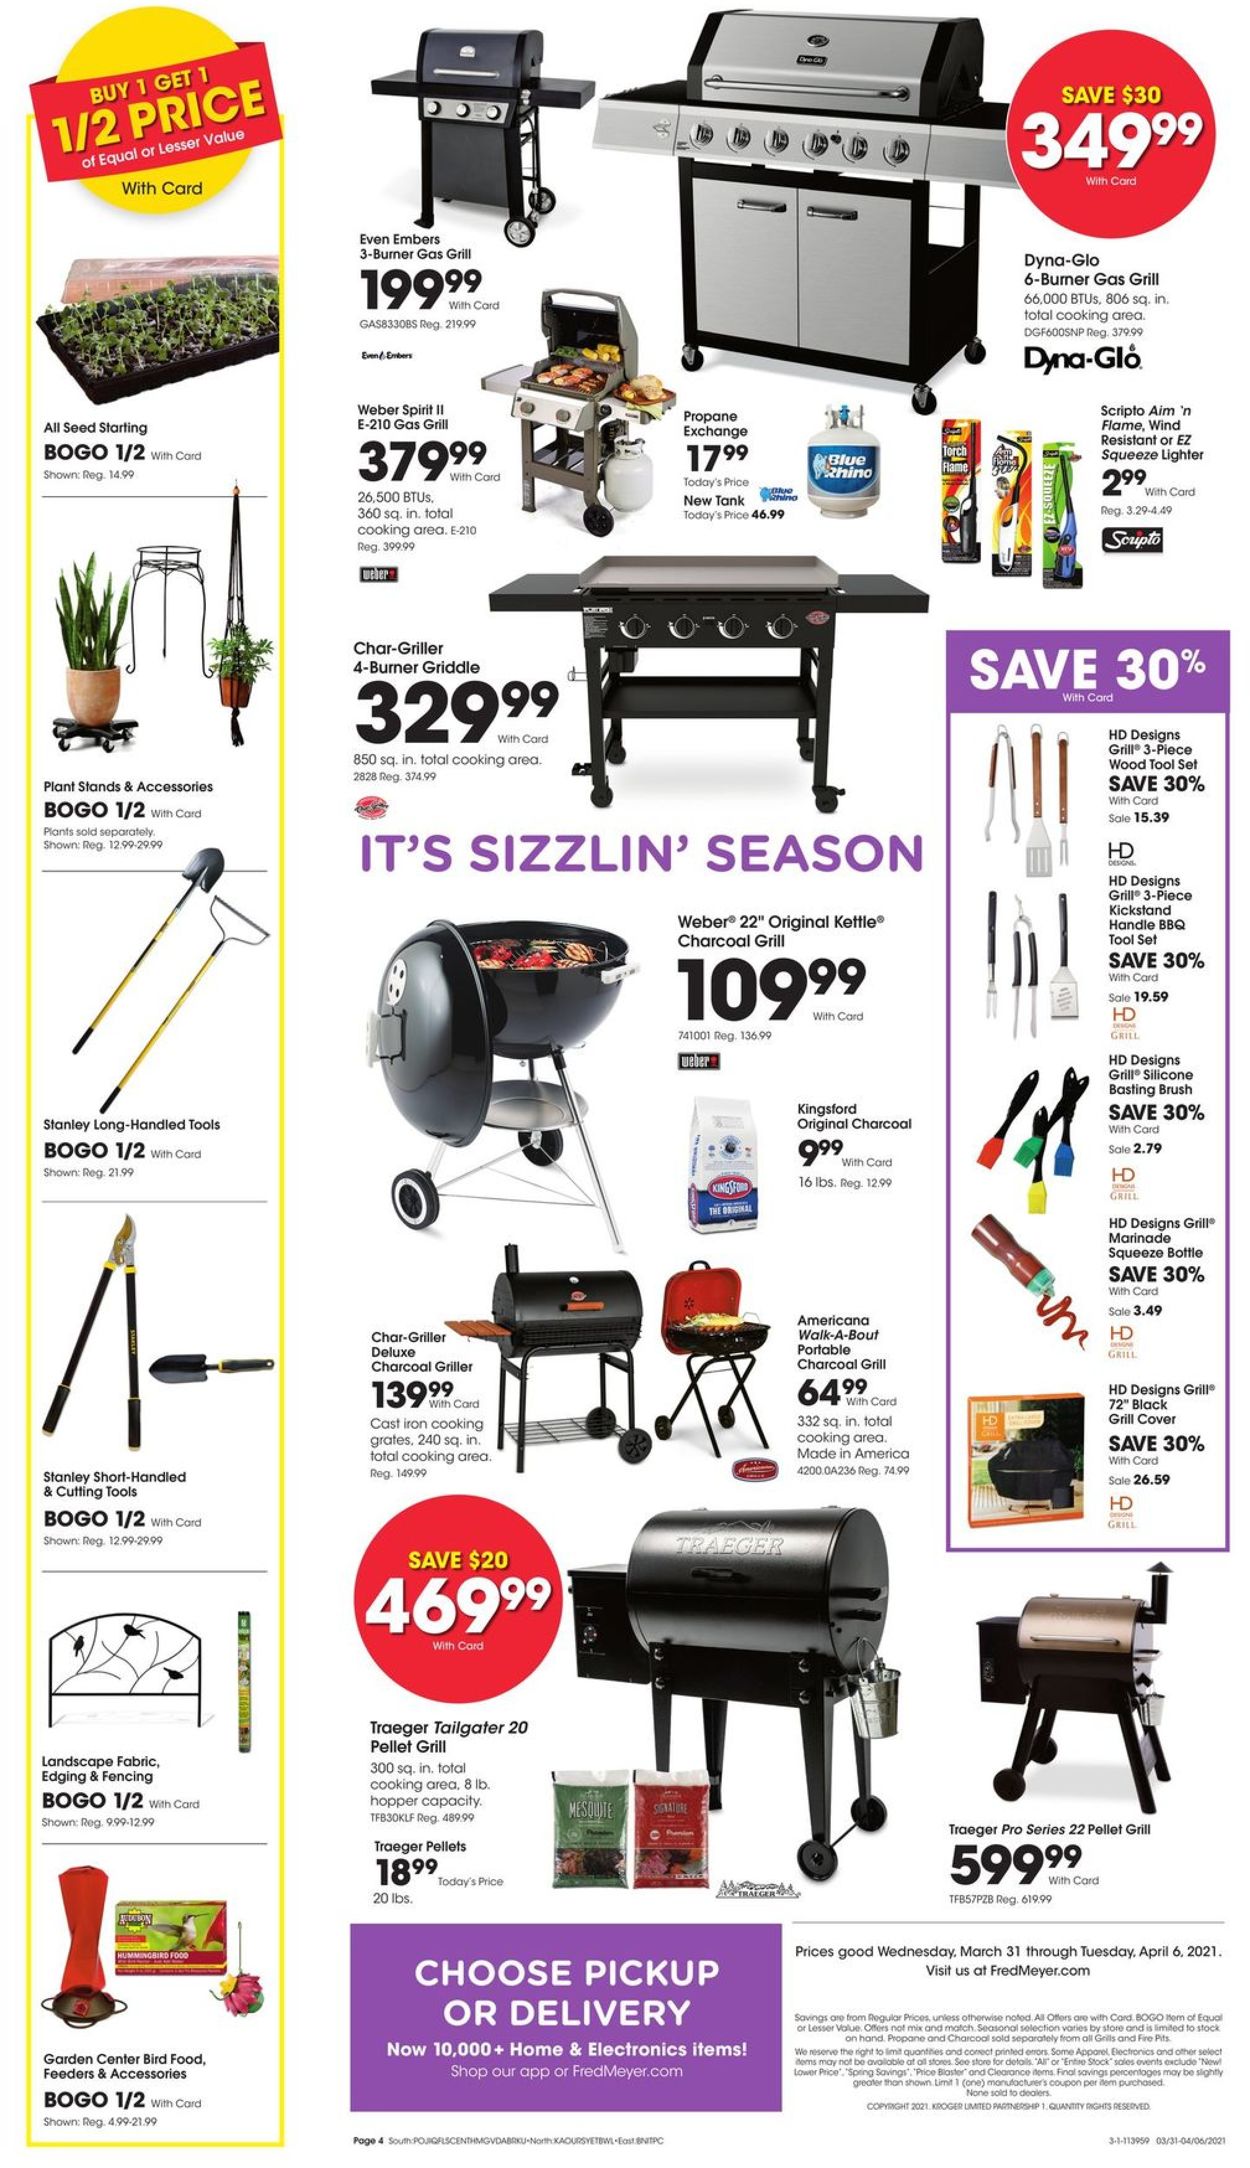 Catalogue Fred Meyer - Easter 2021 ad from 03/31/2021